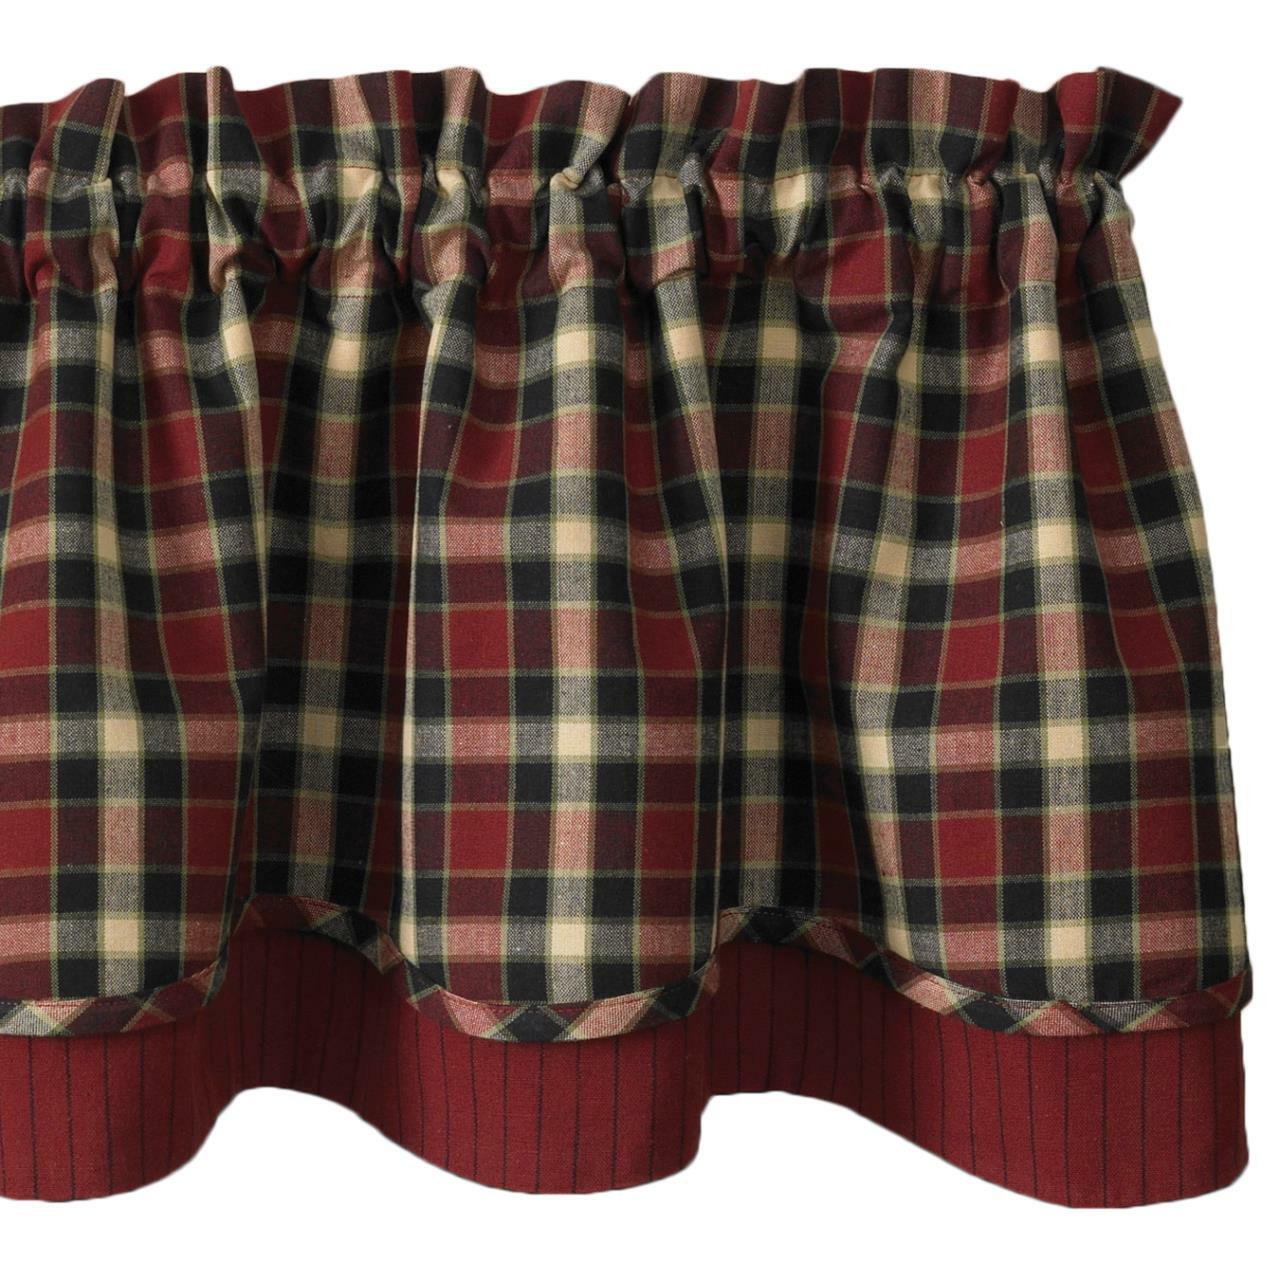 Concord Valance - Lined Layered Park Designs